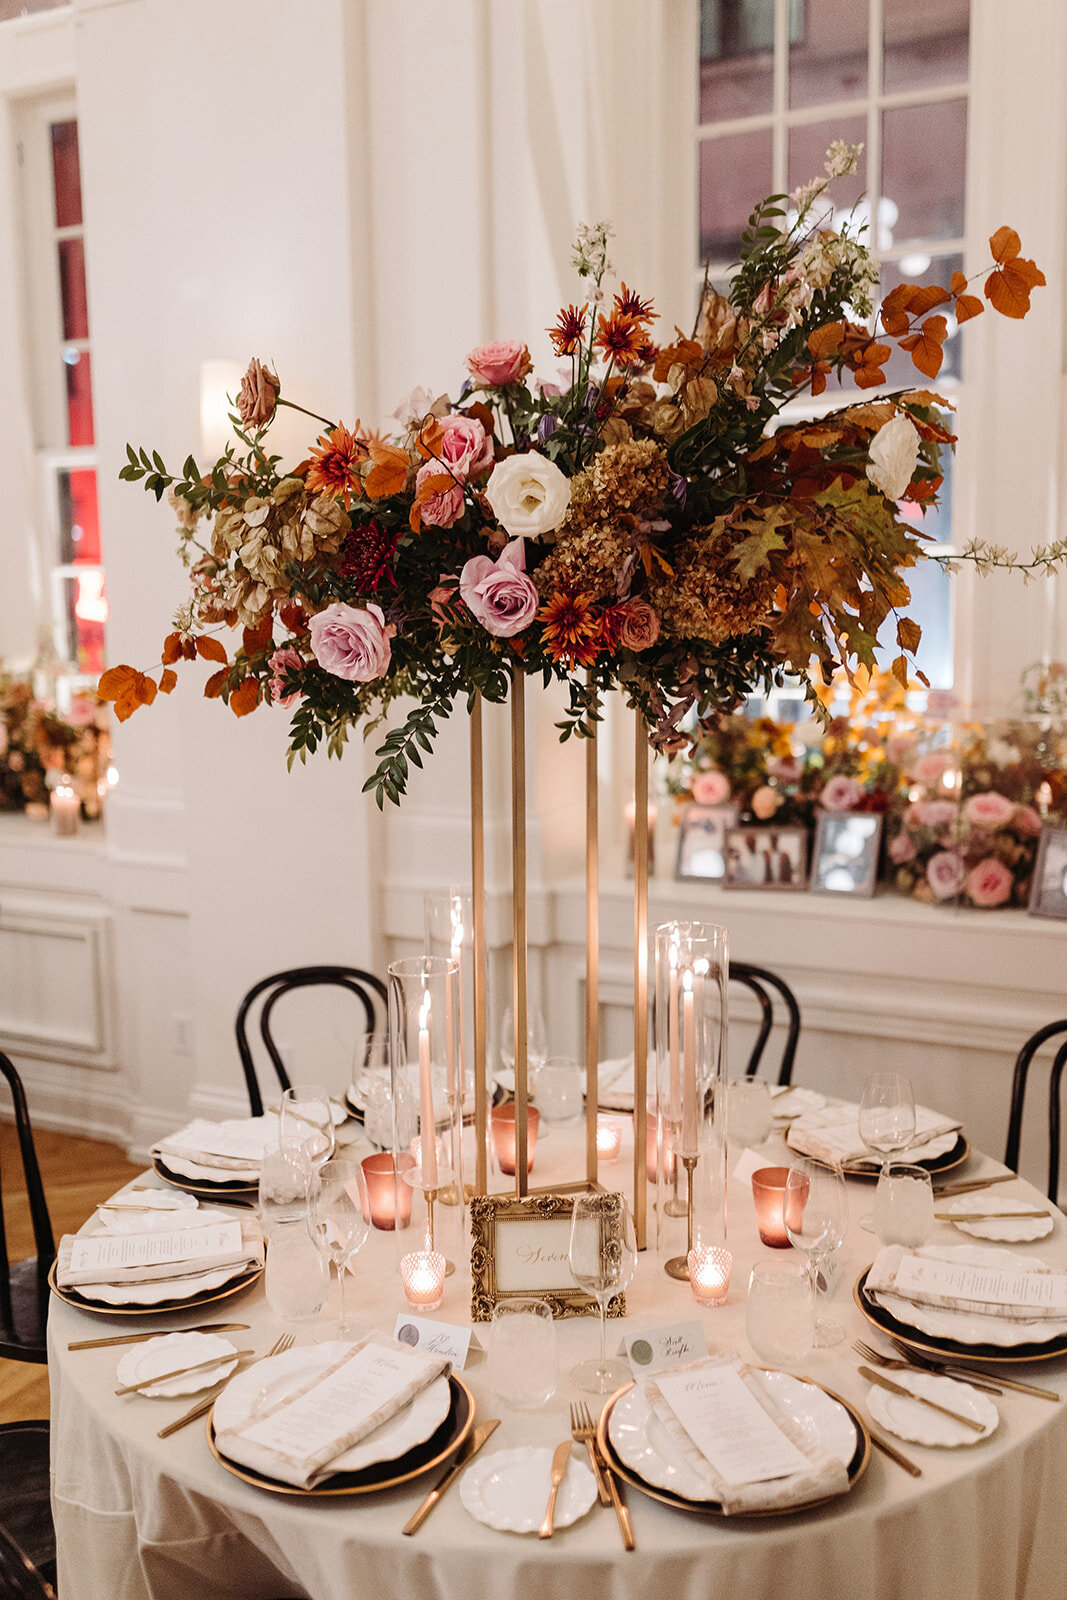 Eye-catching elevated centerpieces complete this Parisian inspired fall wedding with hues of dusty rose, terra cotta, burgundy, mauve, lavender, and copper composed of roses, mums, lisianthus, clematis, delphinium, copper beech, dried hydrangea, and fall foliage. Design by Rosemary and Finch in Nashville, TN.